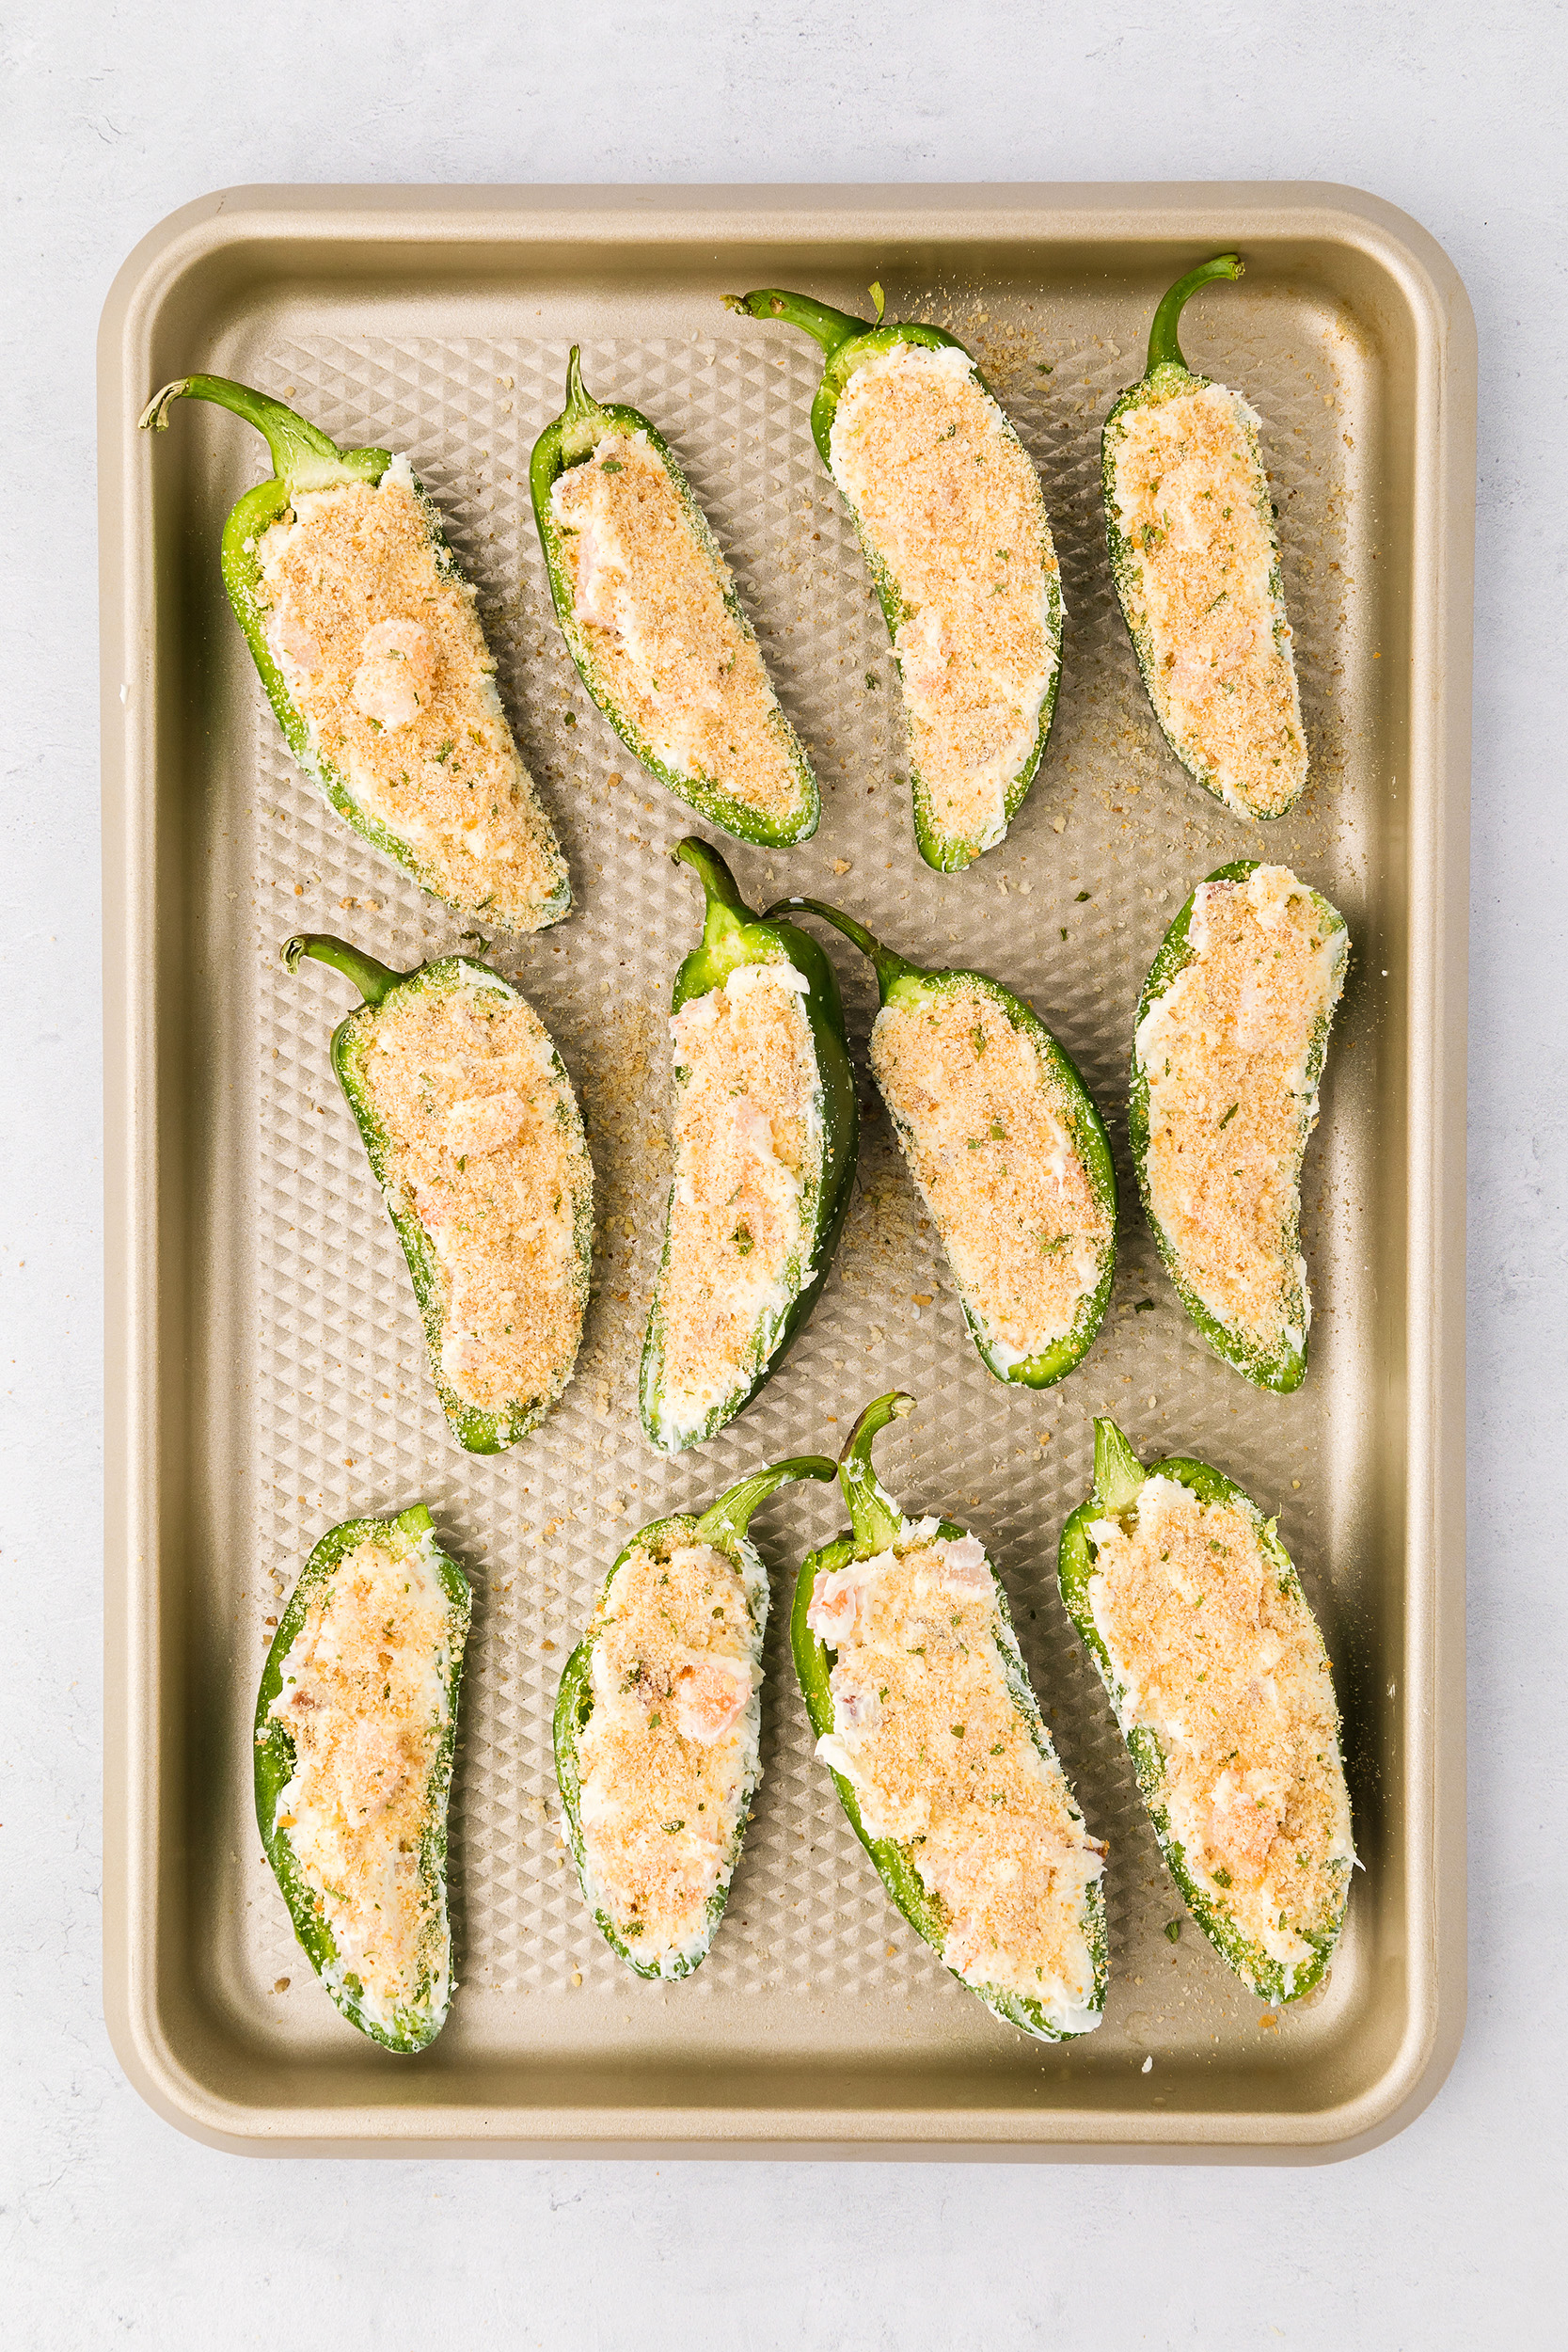 uncooked shrimp stuffed jalapeños topped with bread crumbs on a sheet pan